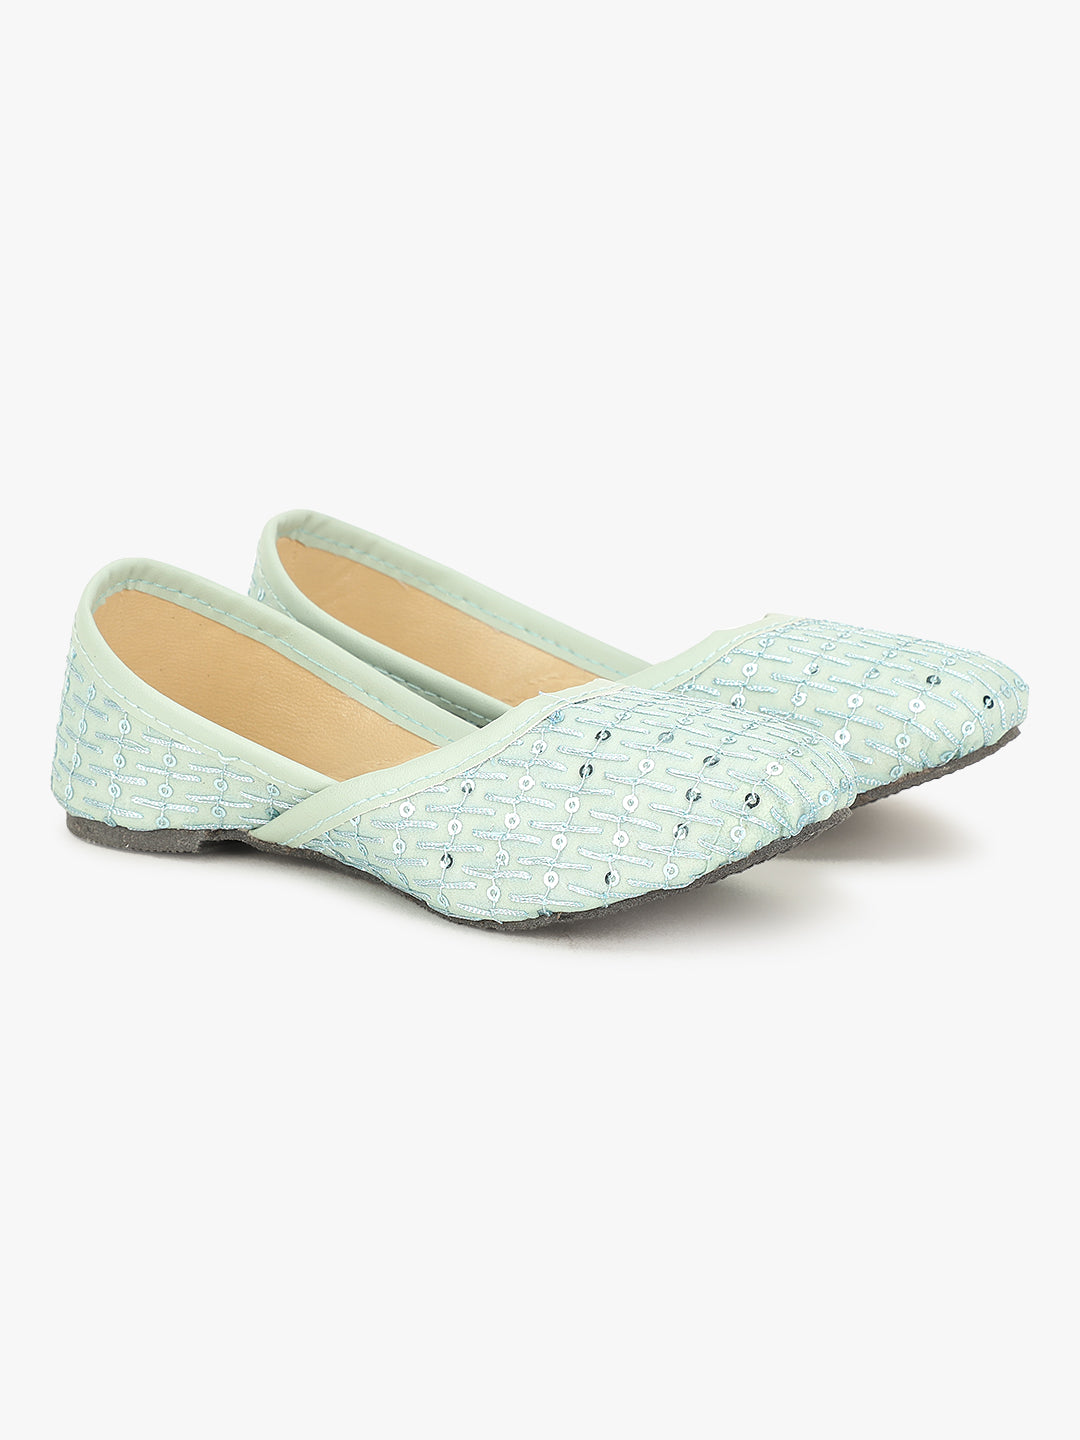 BownBee Embroidered Ethnic Juttis - Sky Blue